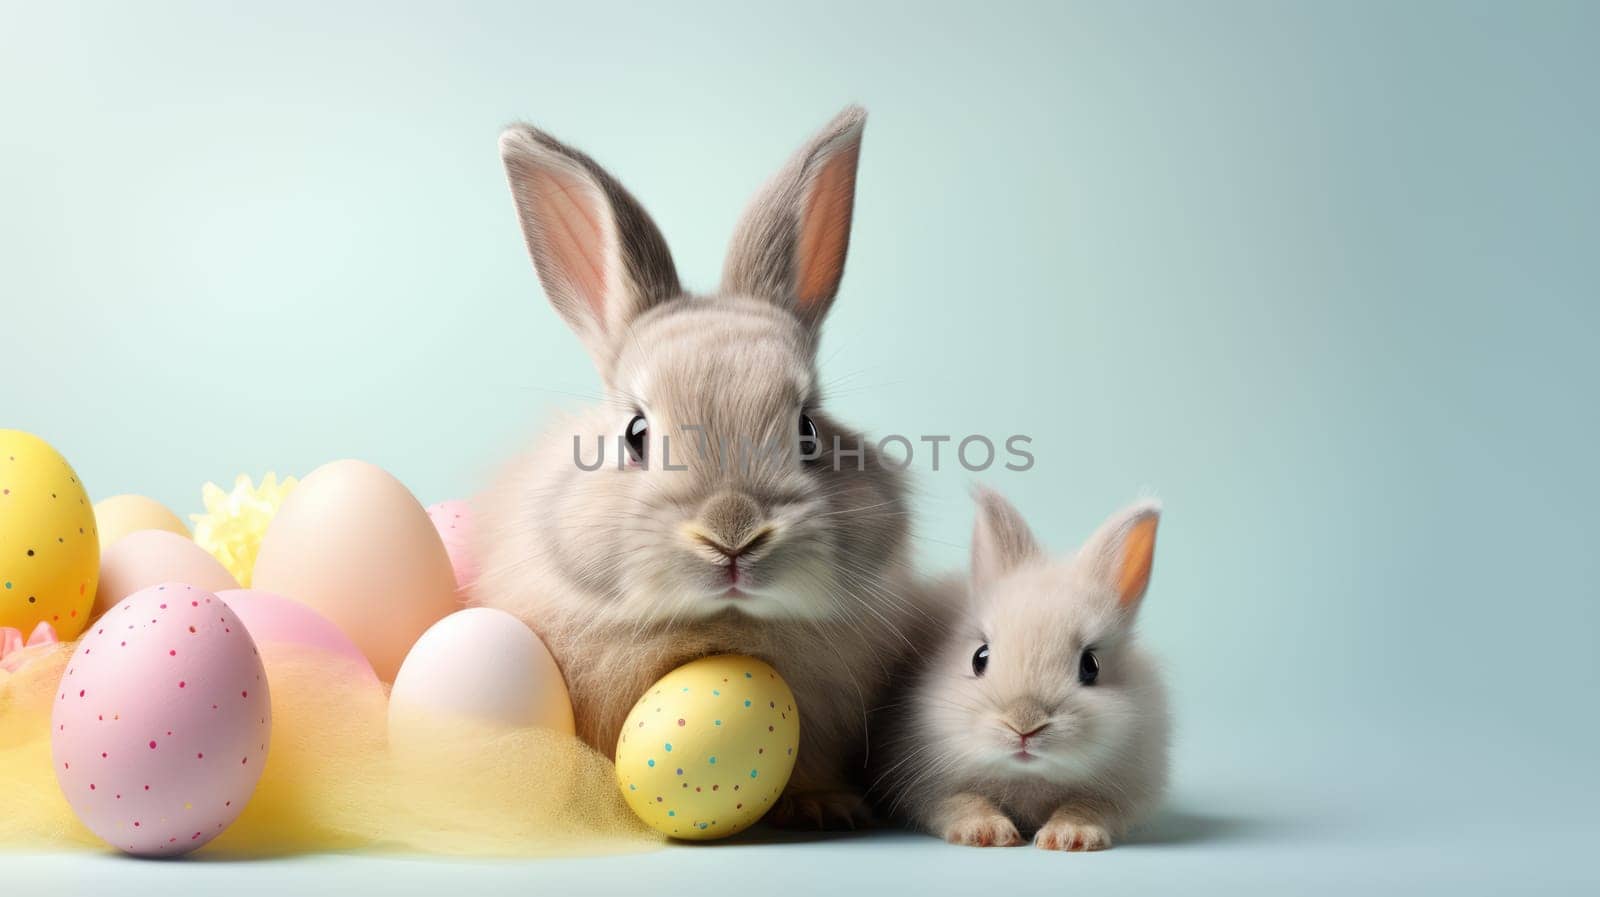 Two cute rabbits with colorful Easter eggs on blue background by JuliaDorian